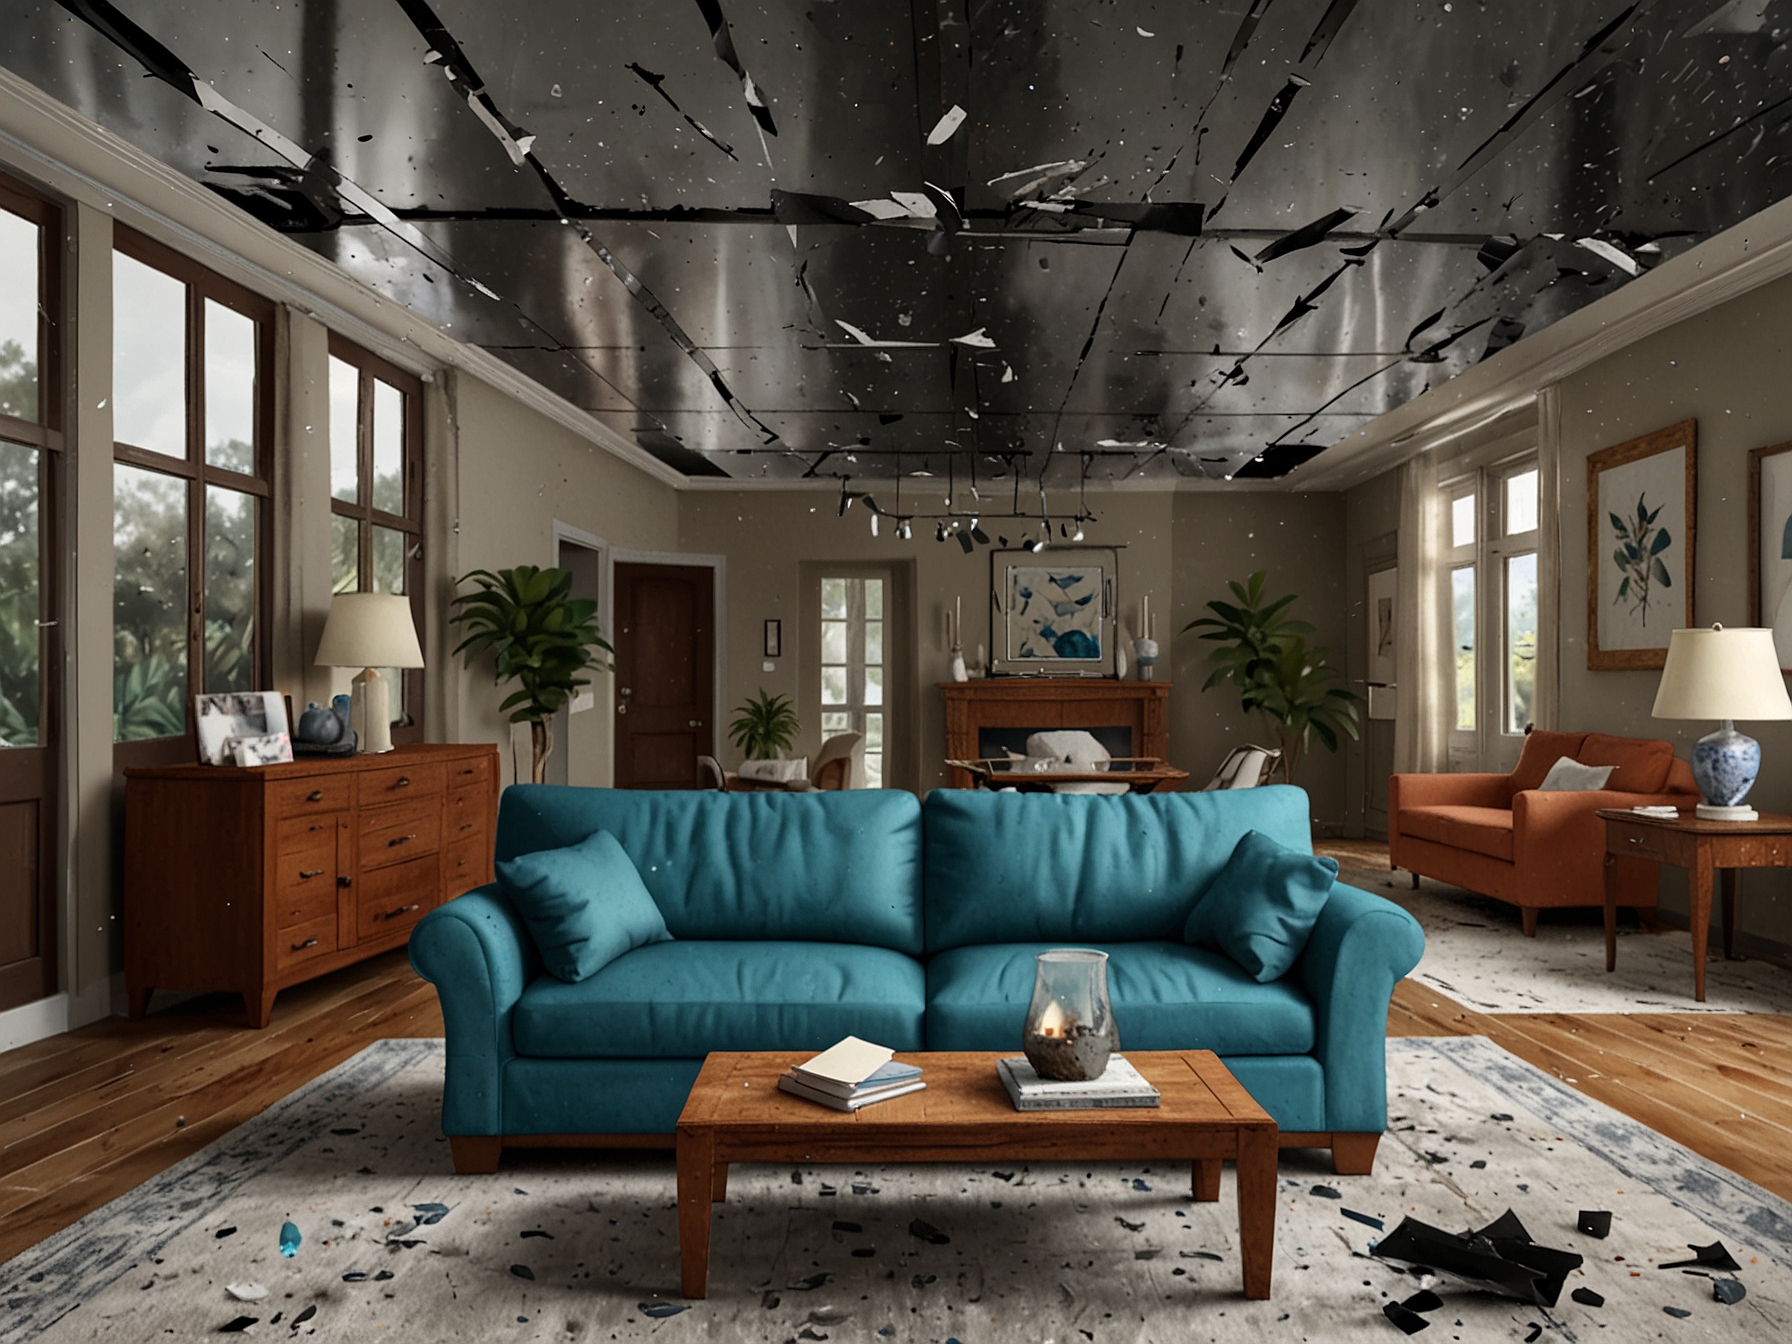 The Otero family's home in Naples, Florida, showing the significant damage caused after a piece of space debris crashed through their roof, with shattered glass and scattered furniture.